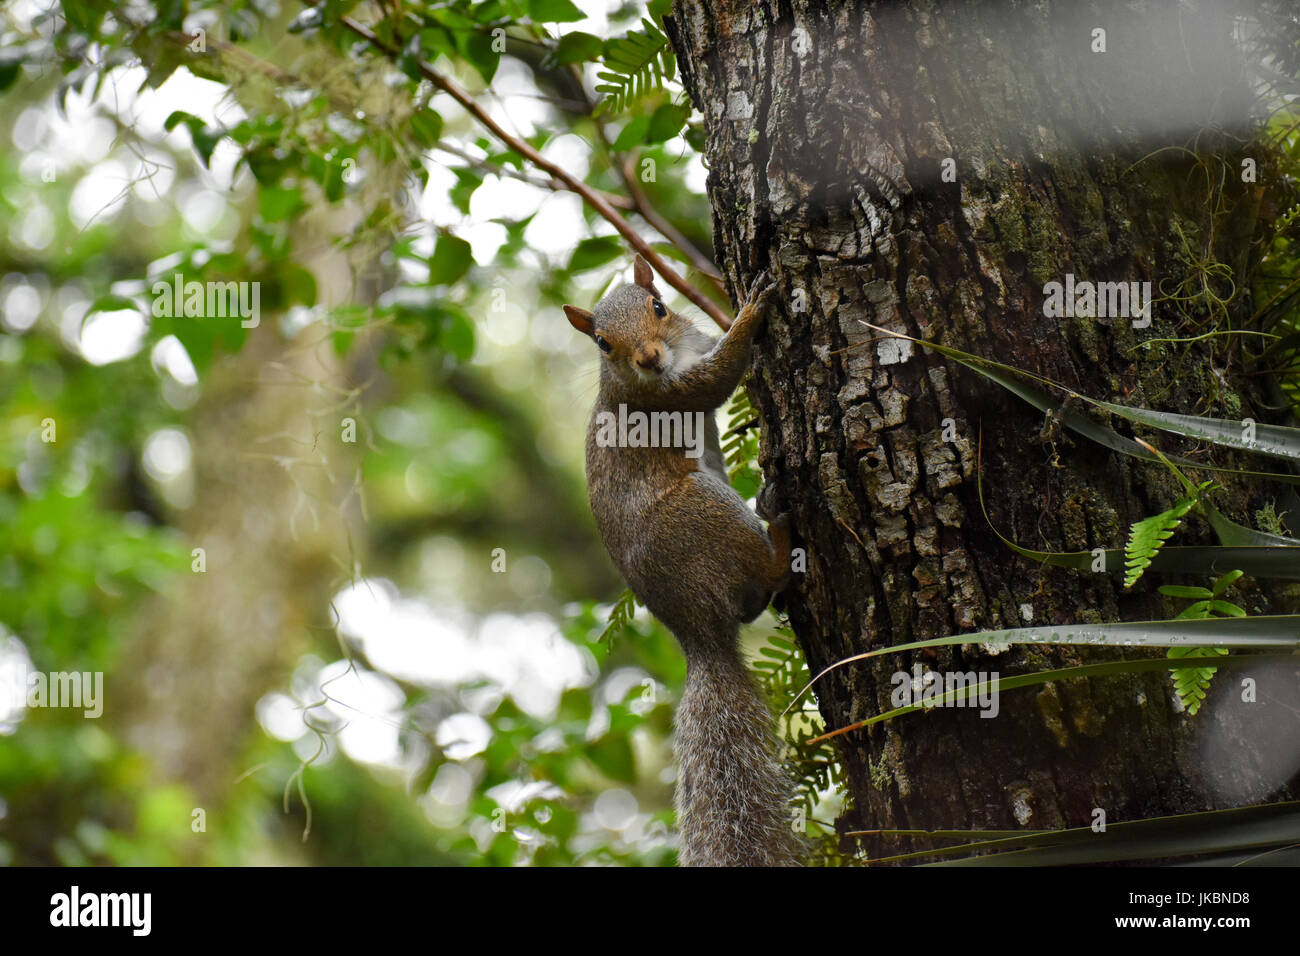 Squirrel staring at camera while clinging to tree bark with blurred background Stock Photo